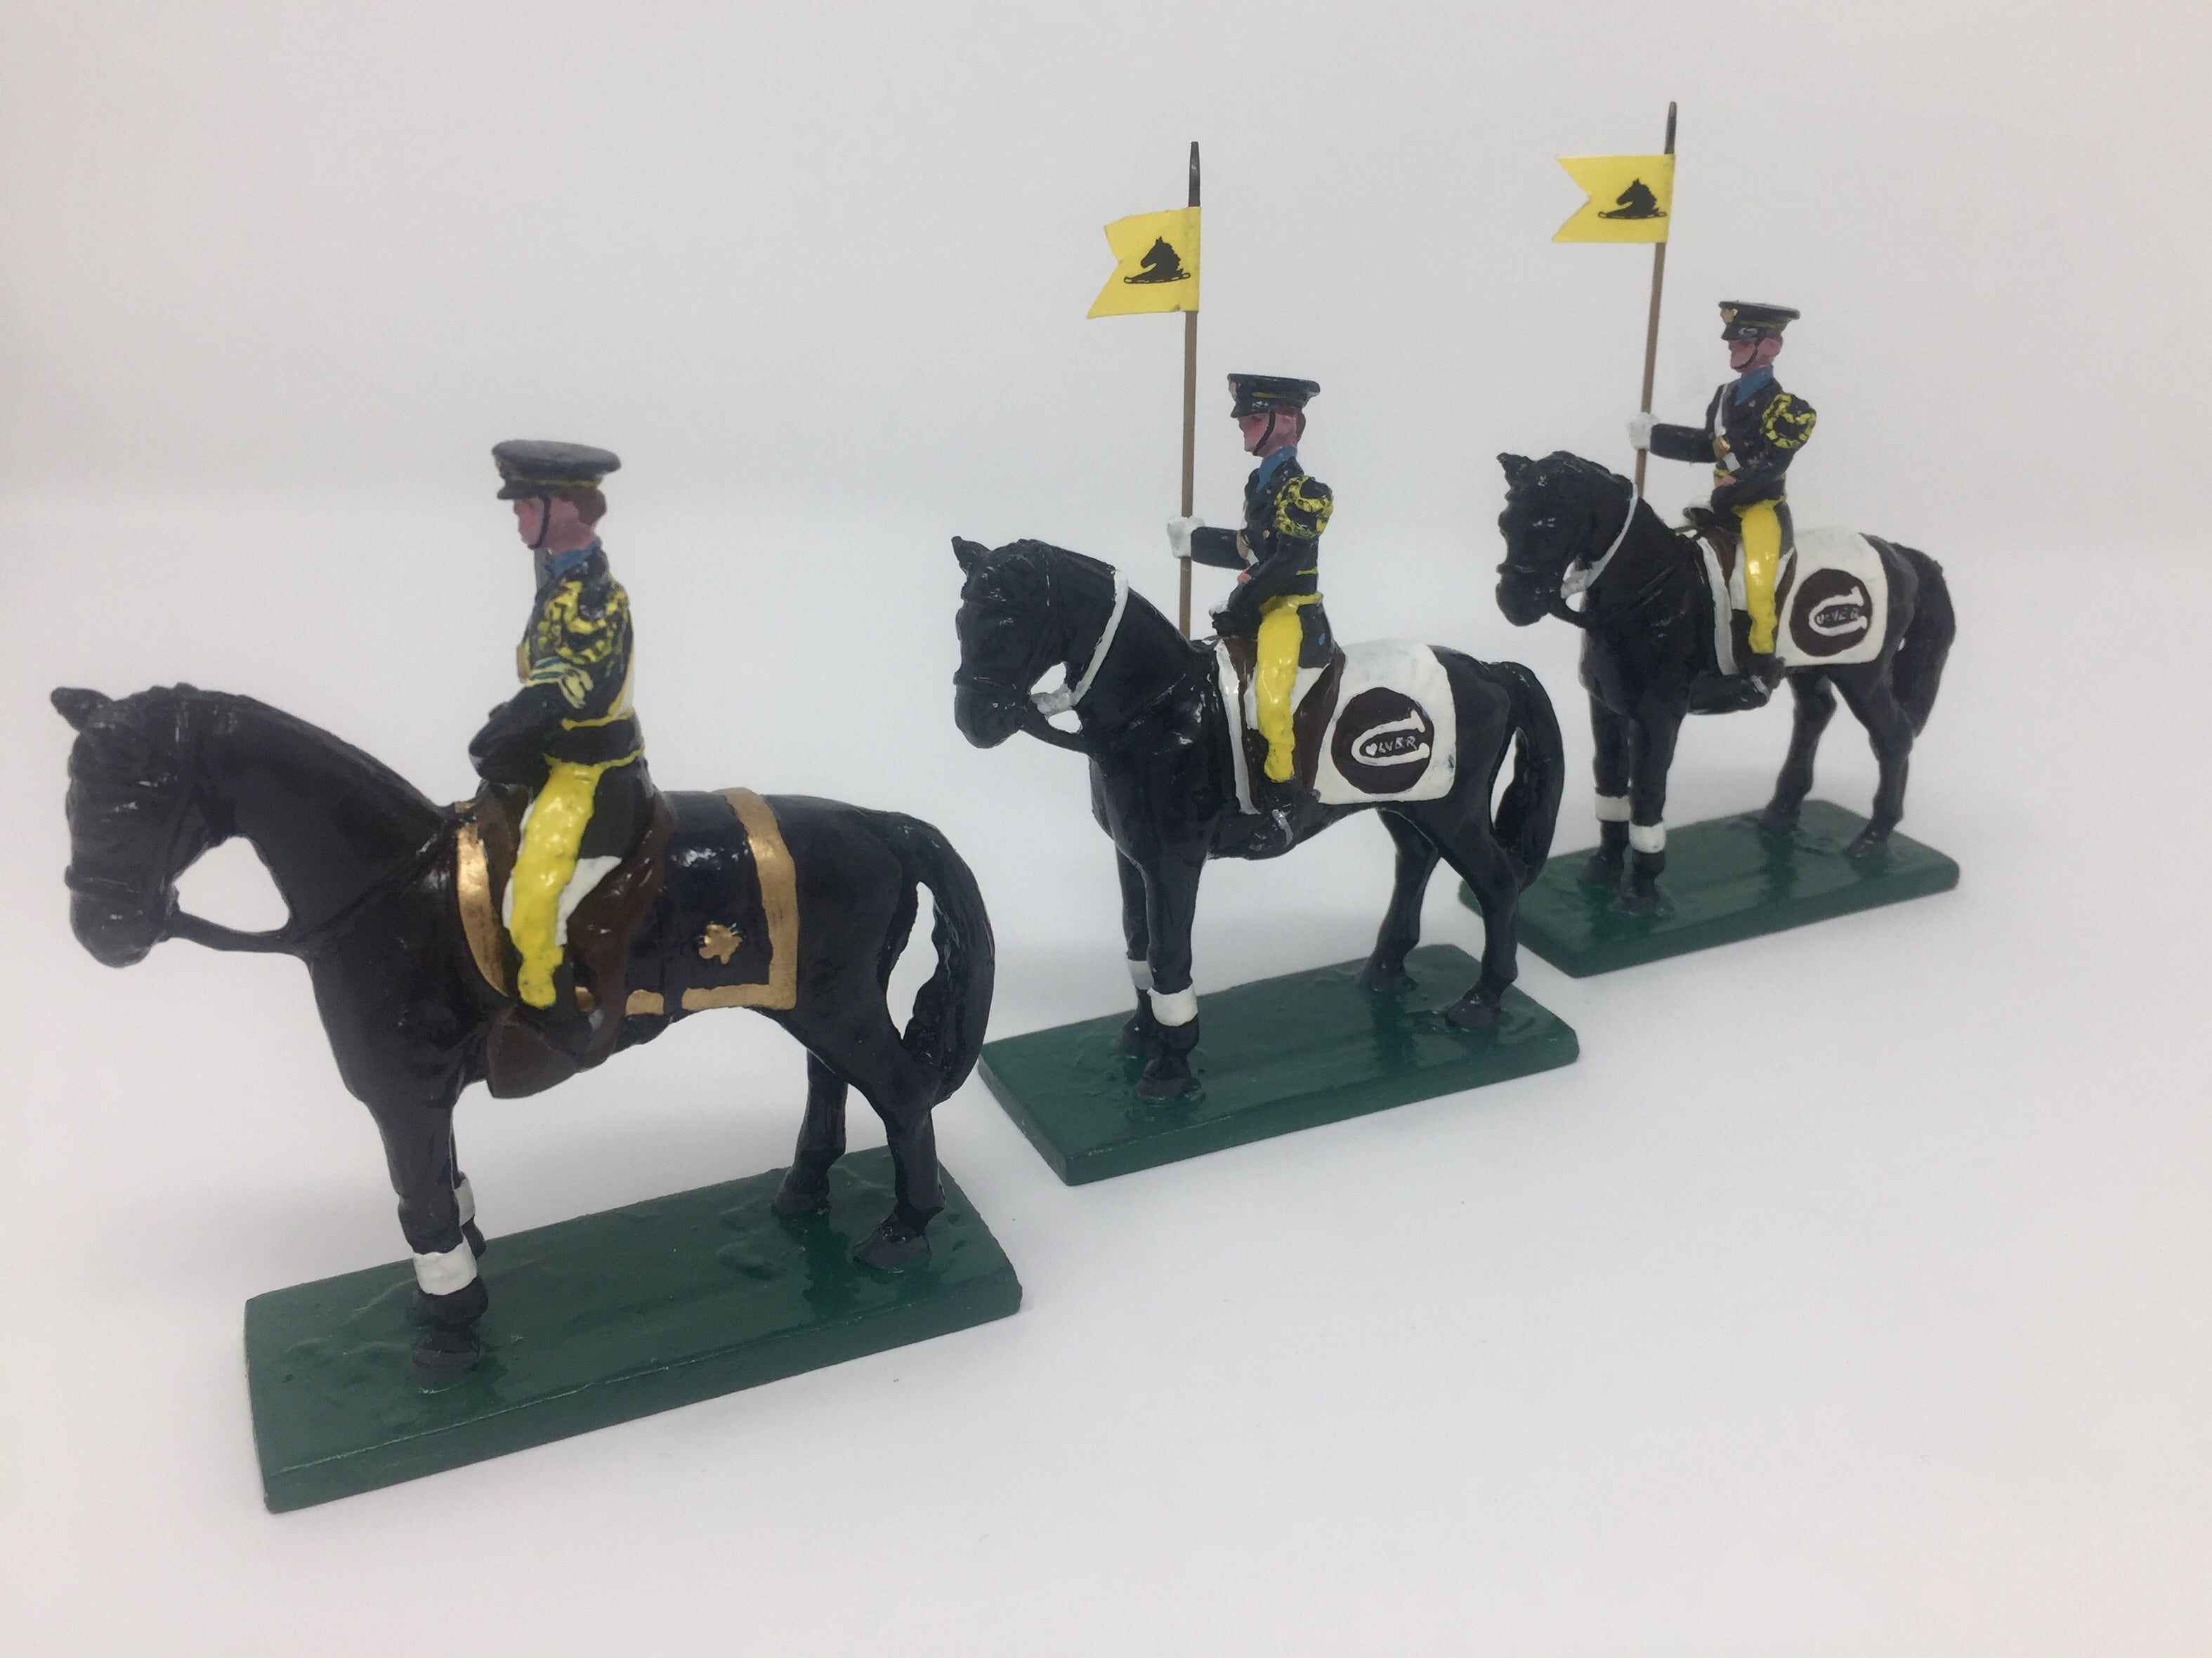 CMA Miniature Figurines - Black Horse Troop Lancers with Officer